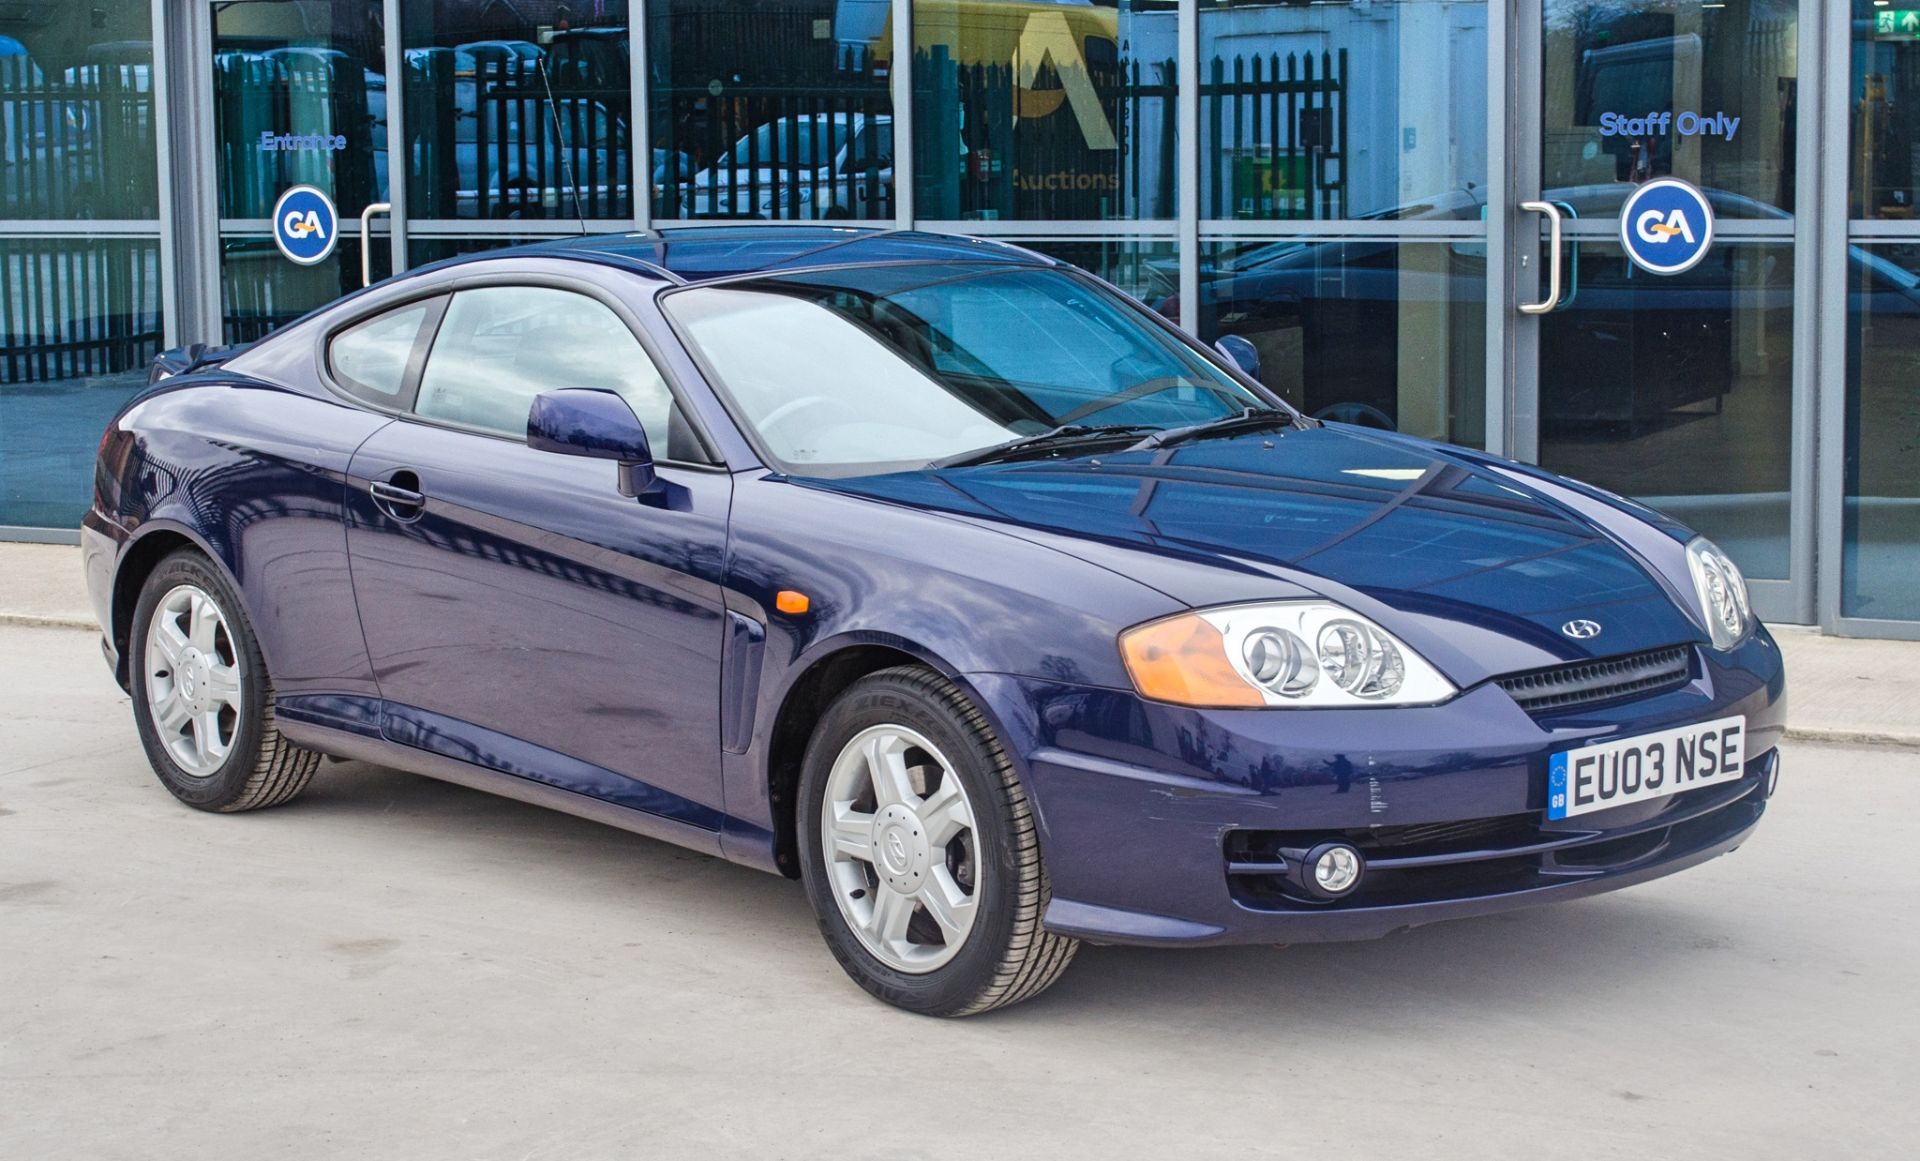 2003 Hyundai Coupe 1.6 S 1600 cc 3 door coupe - Image 2 of 56